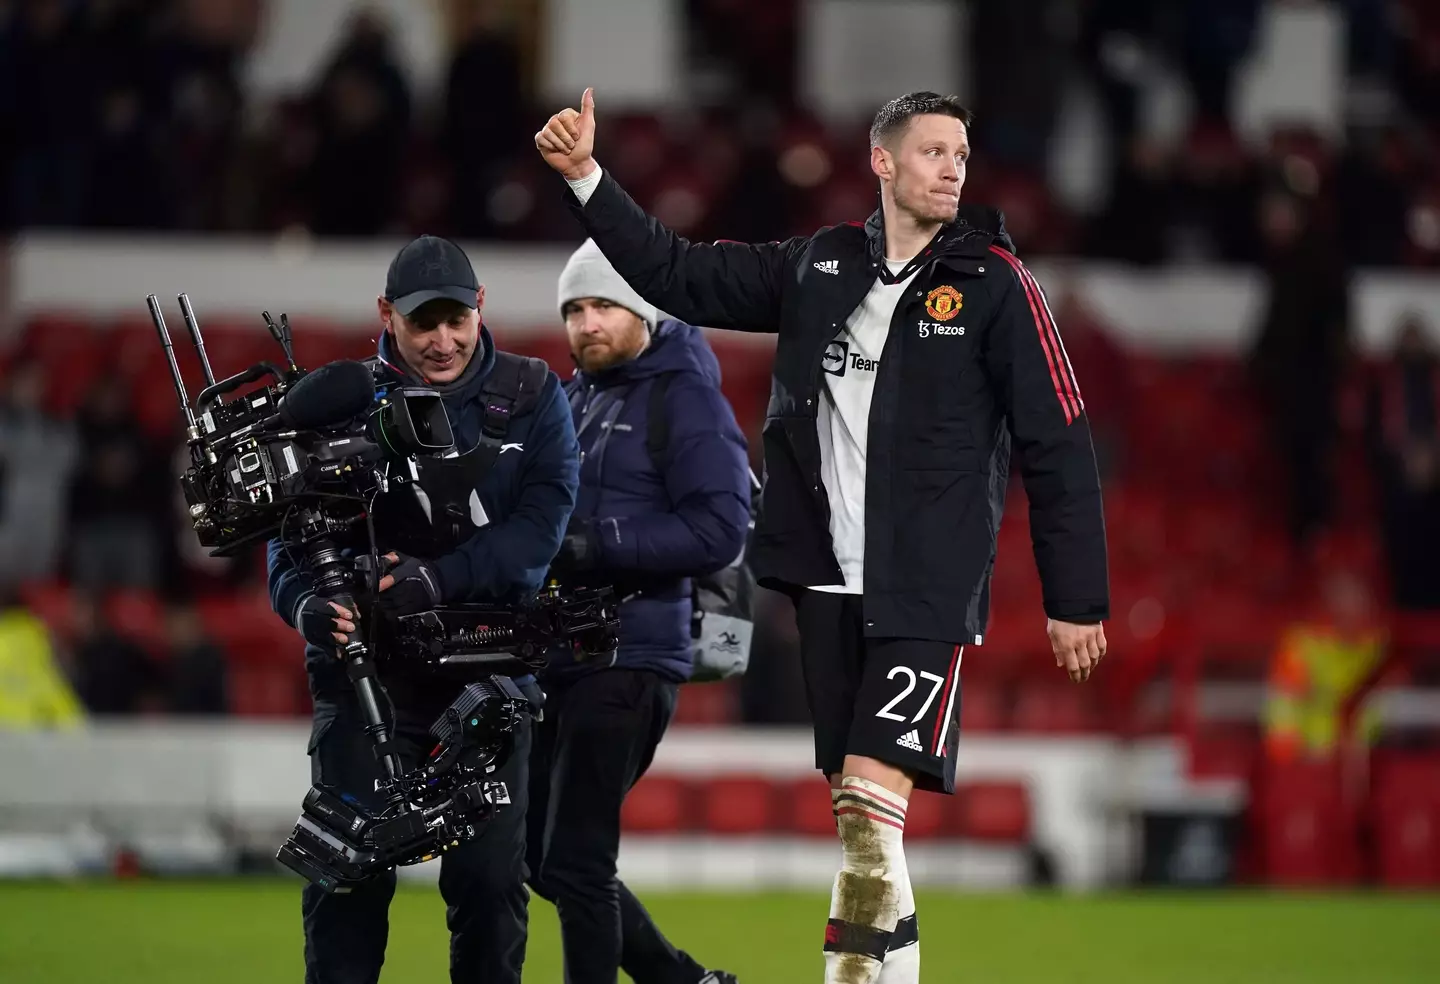 Weghorst is becoming a fan favourite at Old Trafford. (Image